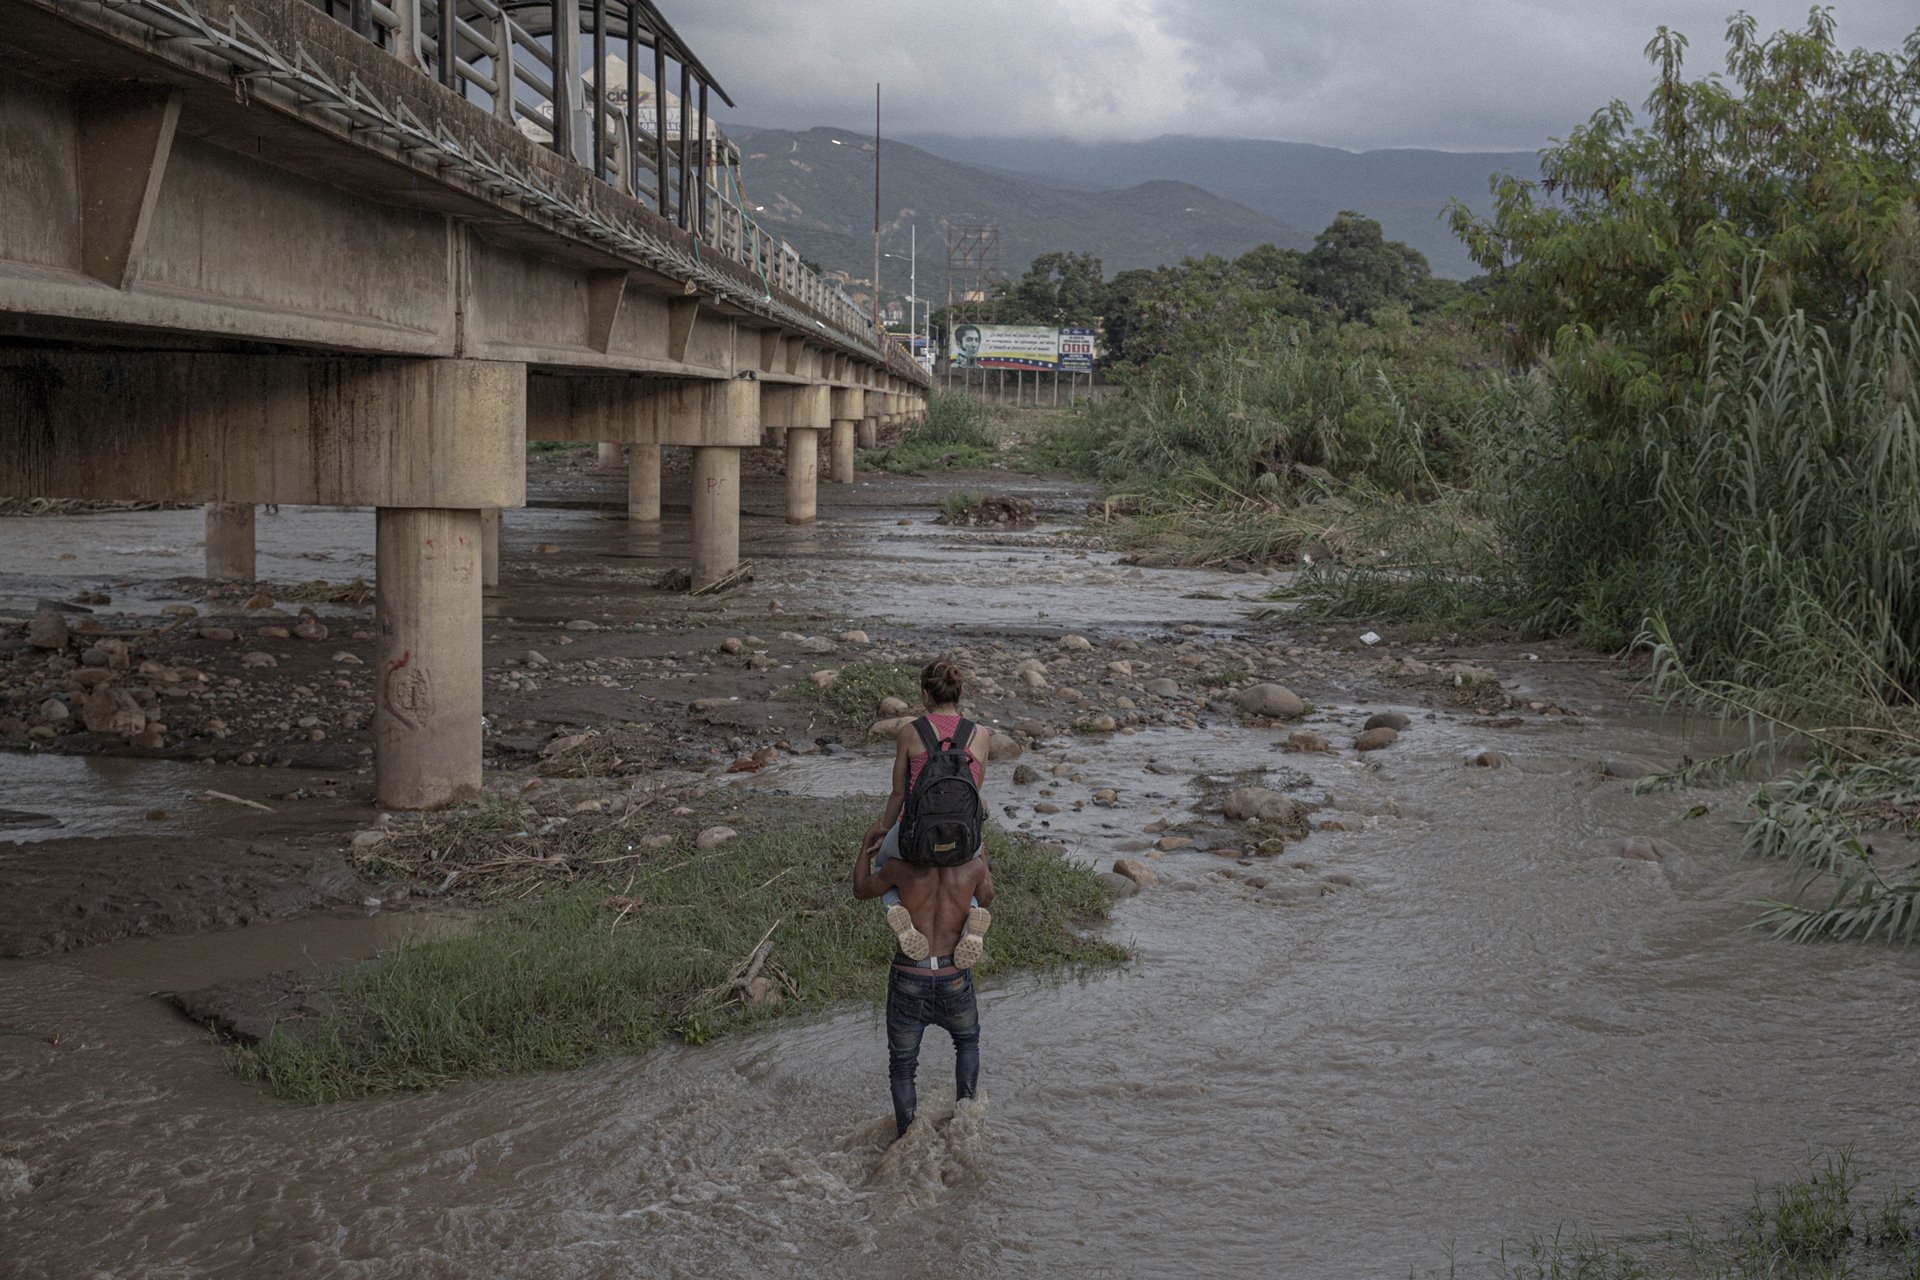 <p>A man carries a woman across the Táchira River, which forms the Venezuela-Colombia border. Bridges were closed due the COVID-19 pandemic. UNHCR reported that Colombia hosted some 1.8 million Venezuelan refugees and migrants by May 2022, the largest portion of the diaspora.&nbsp;</p>
